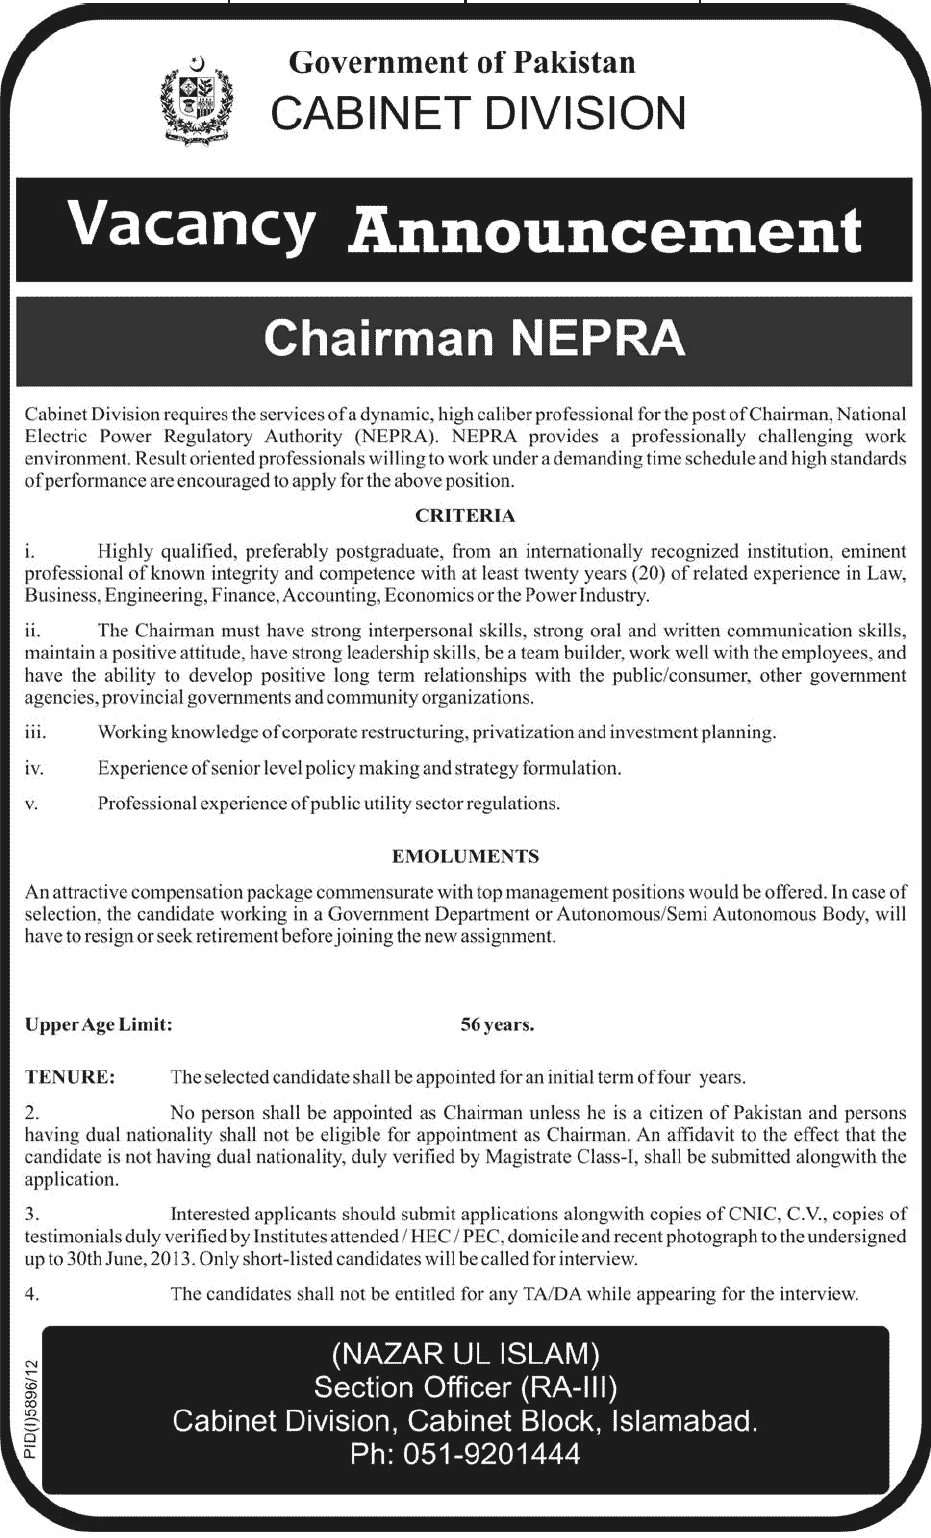 Chairman NEPRA Jobs in PTA Cabinet Division Islamabad